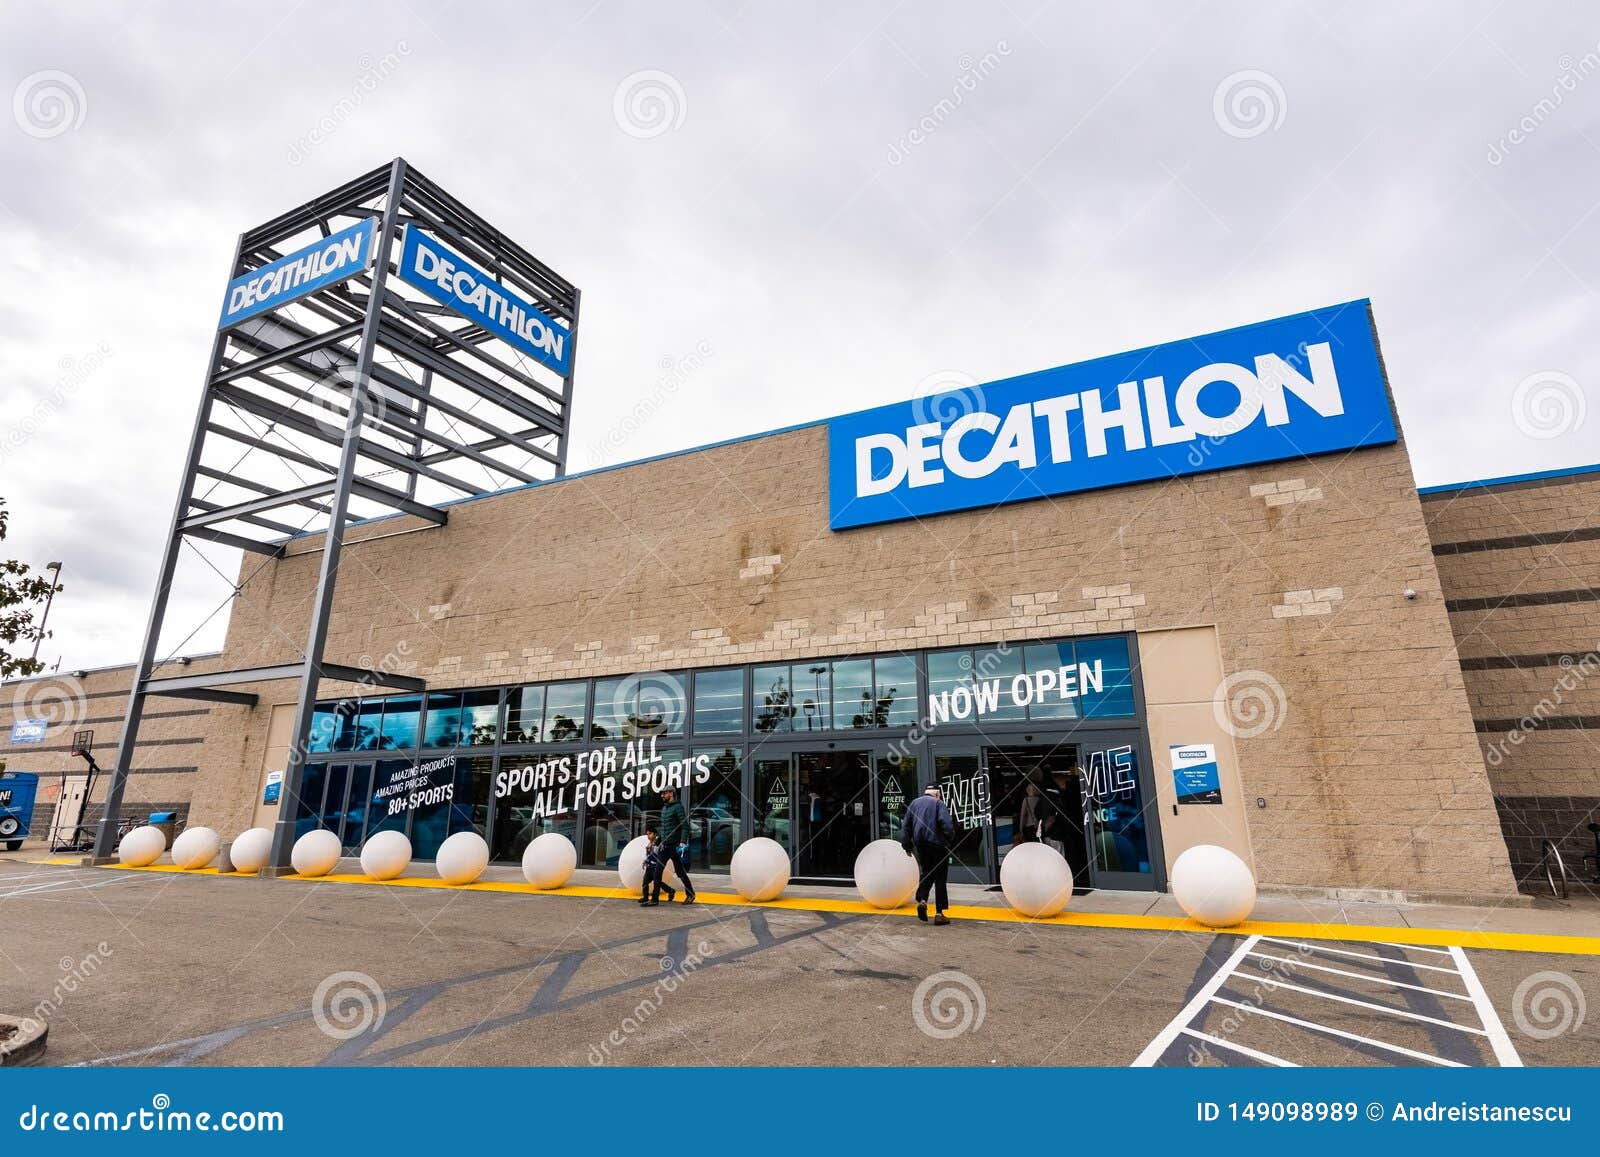 May 26, 2019 Emeryville / CA / USA - Exterior View of Decathlon